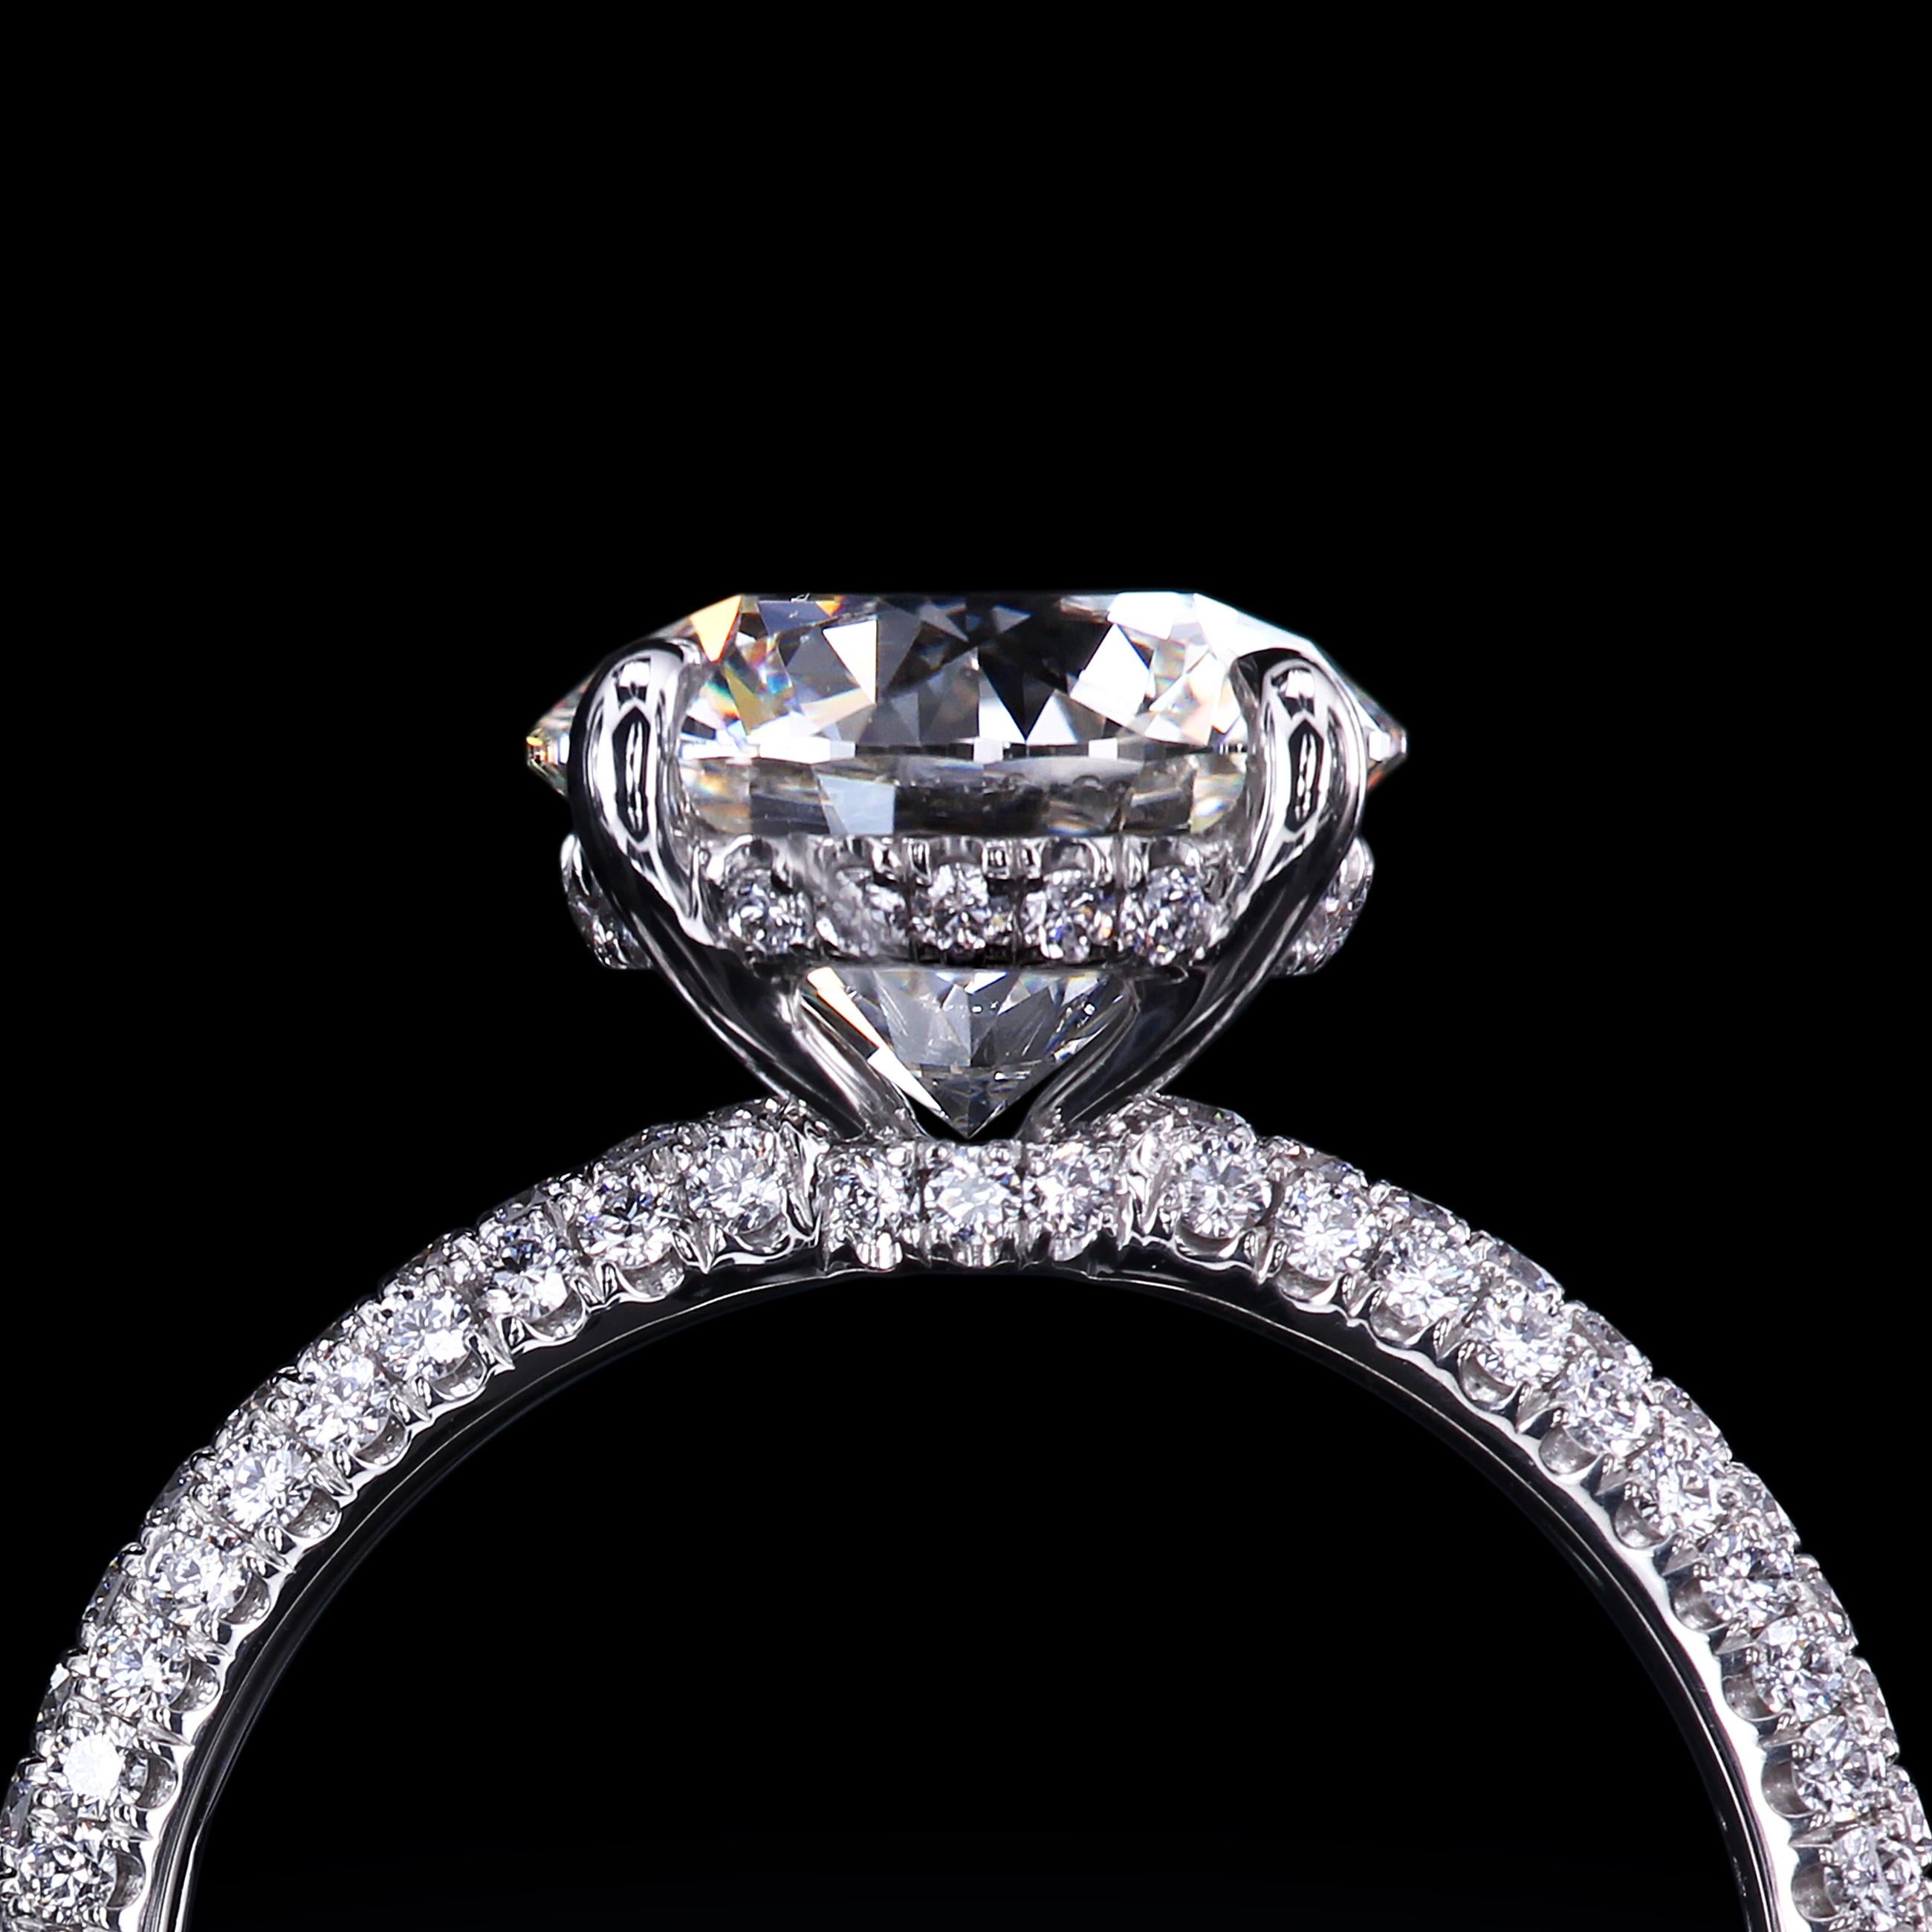 Bespoke solitaire ring custom-crafted by hand and set with three row of micro pave. 

The lead time for project completion is approximately four weeks.

Custom made pieces are NOT RETURNABLE; they are offered as a FINAL SALE only. You can have the